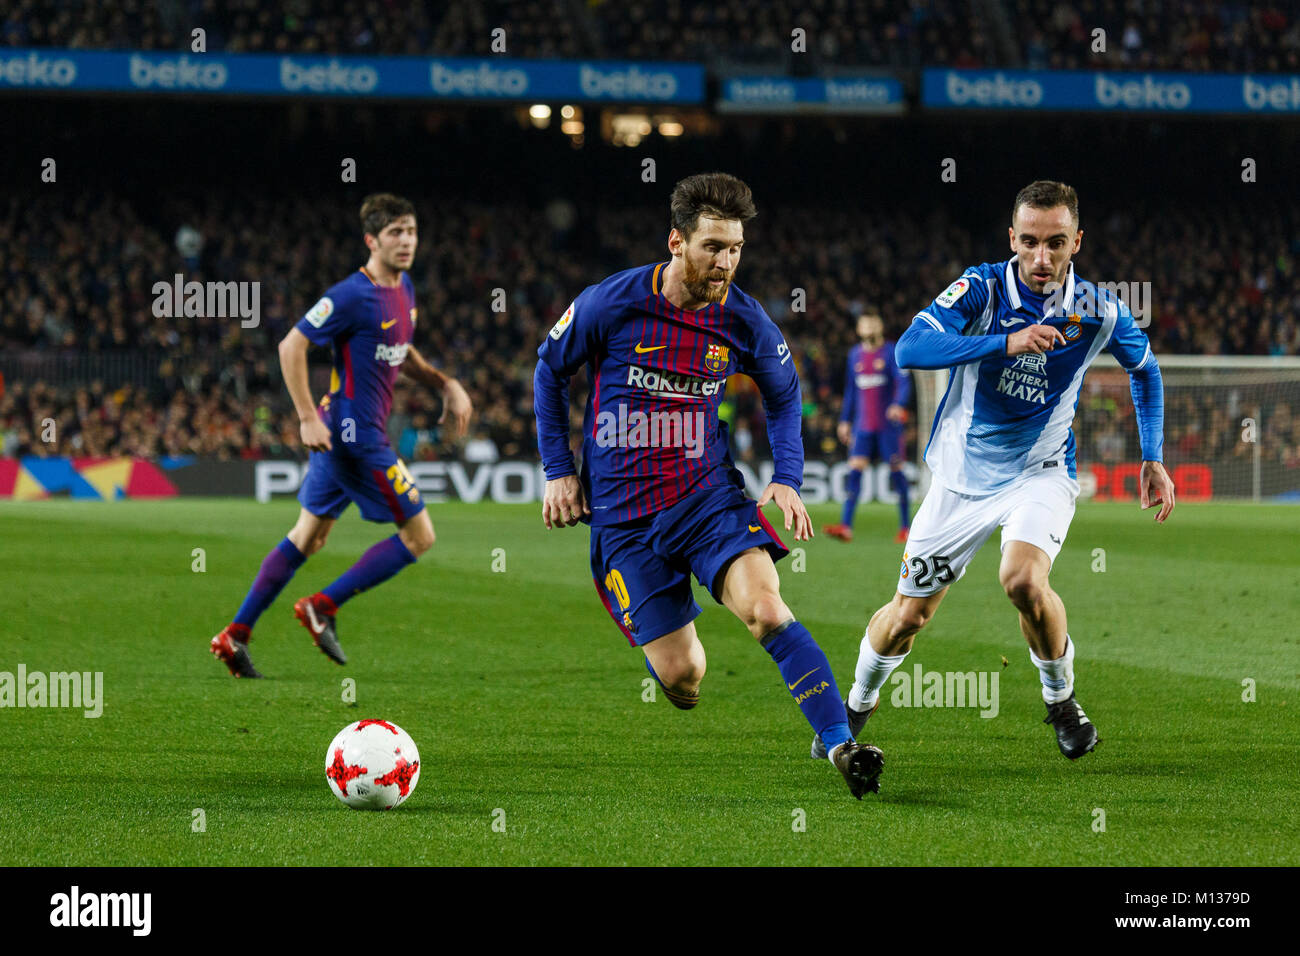 Barcelona, Spain. 25th Jan, 2018. FC Barcelona's Lionel Messi(front L) and RCD Espanyol's Sergio Darder vie for the ball during the Spanish King's Cup match between FC Barcelona and RCD Espanyol in Barcelona, Spain, on Jan. 25, 2018. FC Barcelona won 2-0. FC Barcelona is qualified for semifinals. Credit: Joan Gosa/Xinhua/Alamy Live News Stock Photo